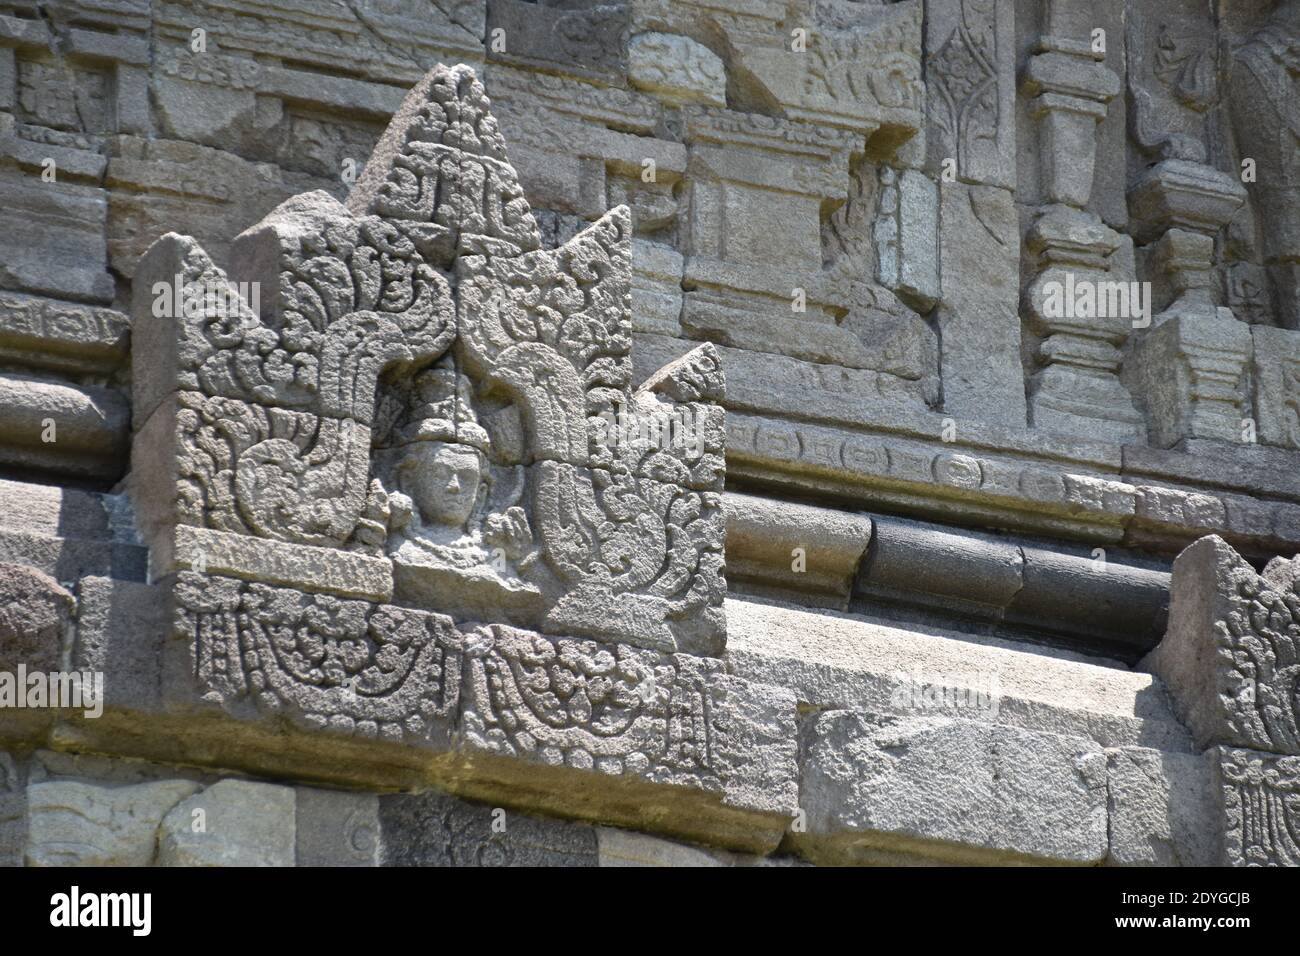 Bodhisattva relief at main temple's wall in the Plaosan temple complex at Central Java, Indonesia Stock Photo